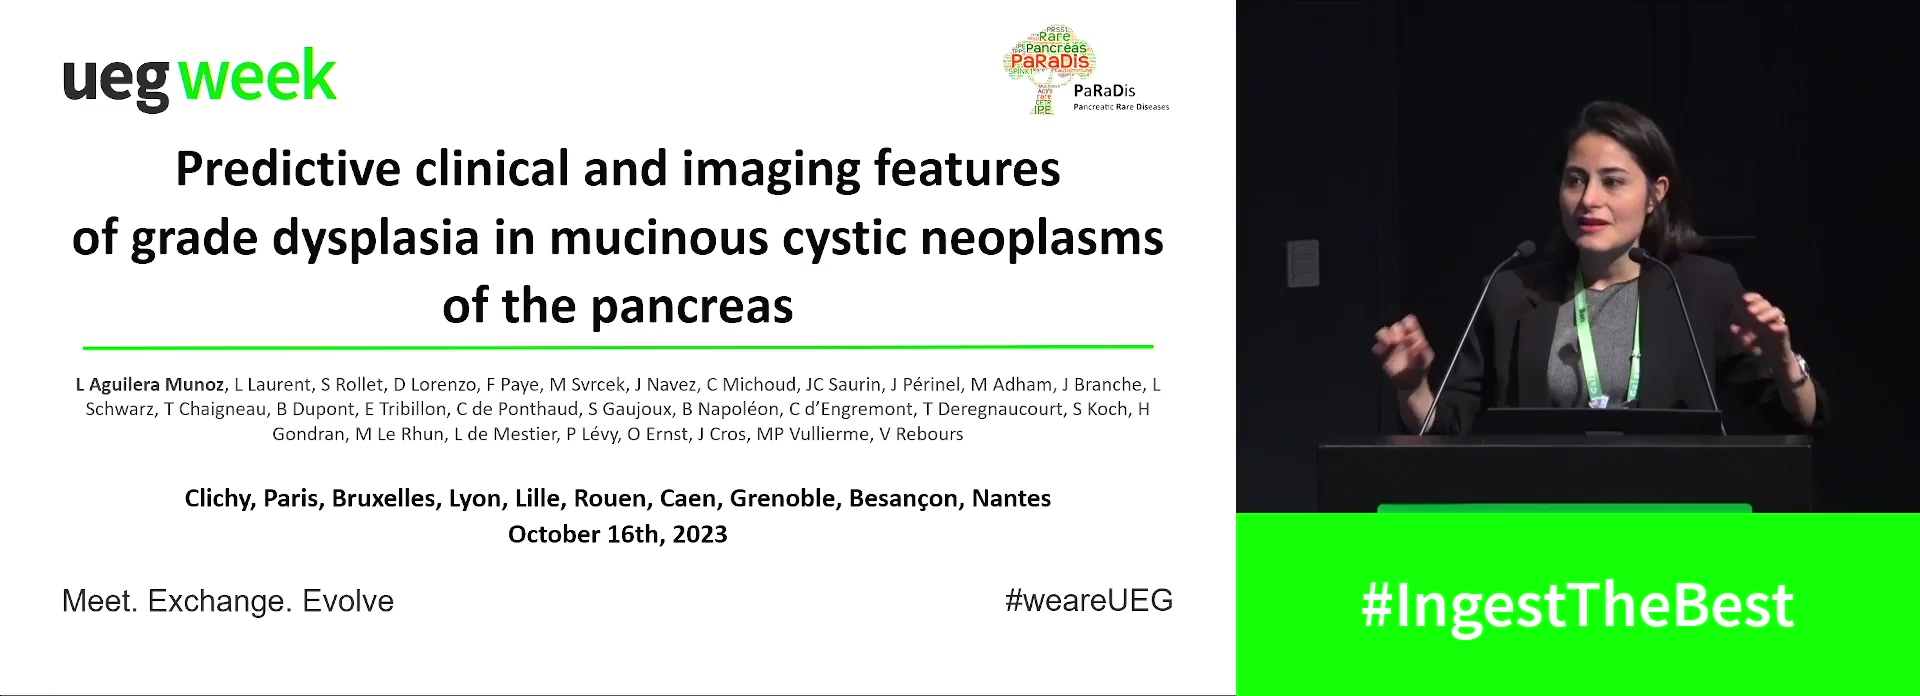 PREDICTIVE CLINICAL AND IMAGING FEATURES OF HIGH-GRADE DYSPLASIA IN MUCINOUS CYSTIC NEOPLASMS OF THE PANCREAS